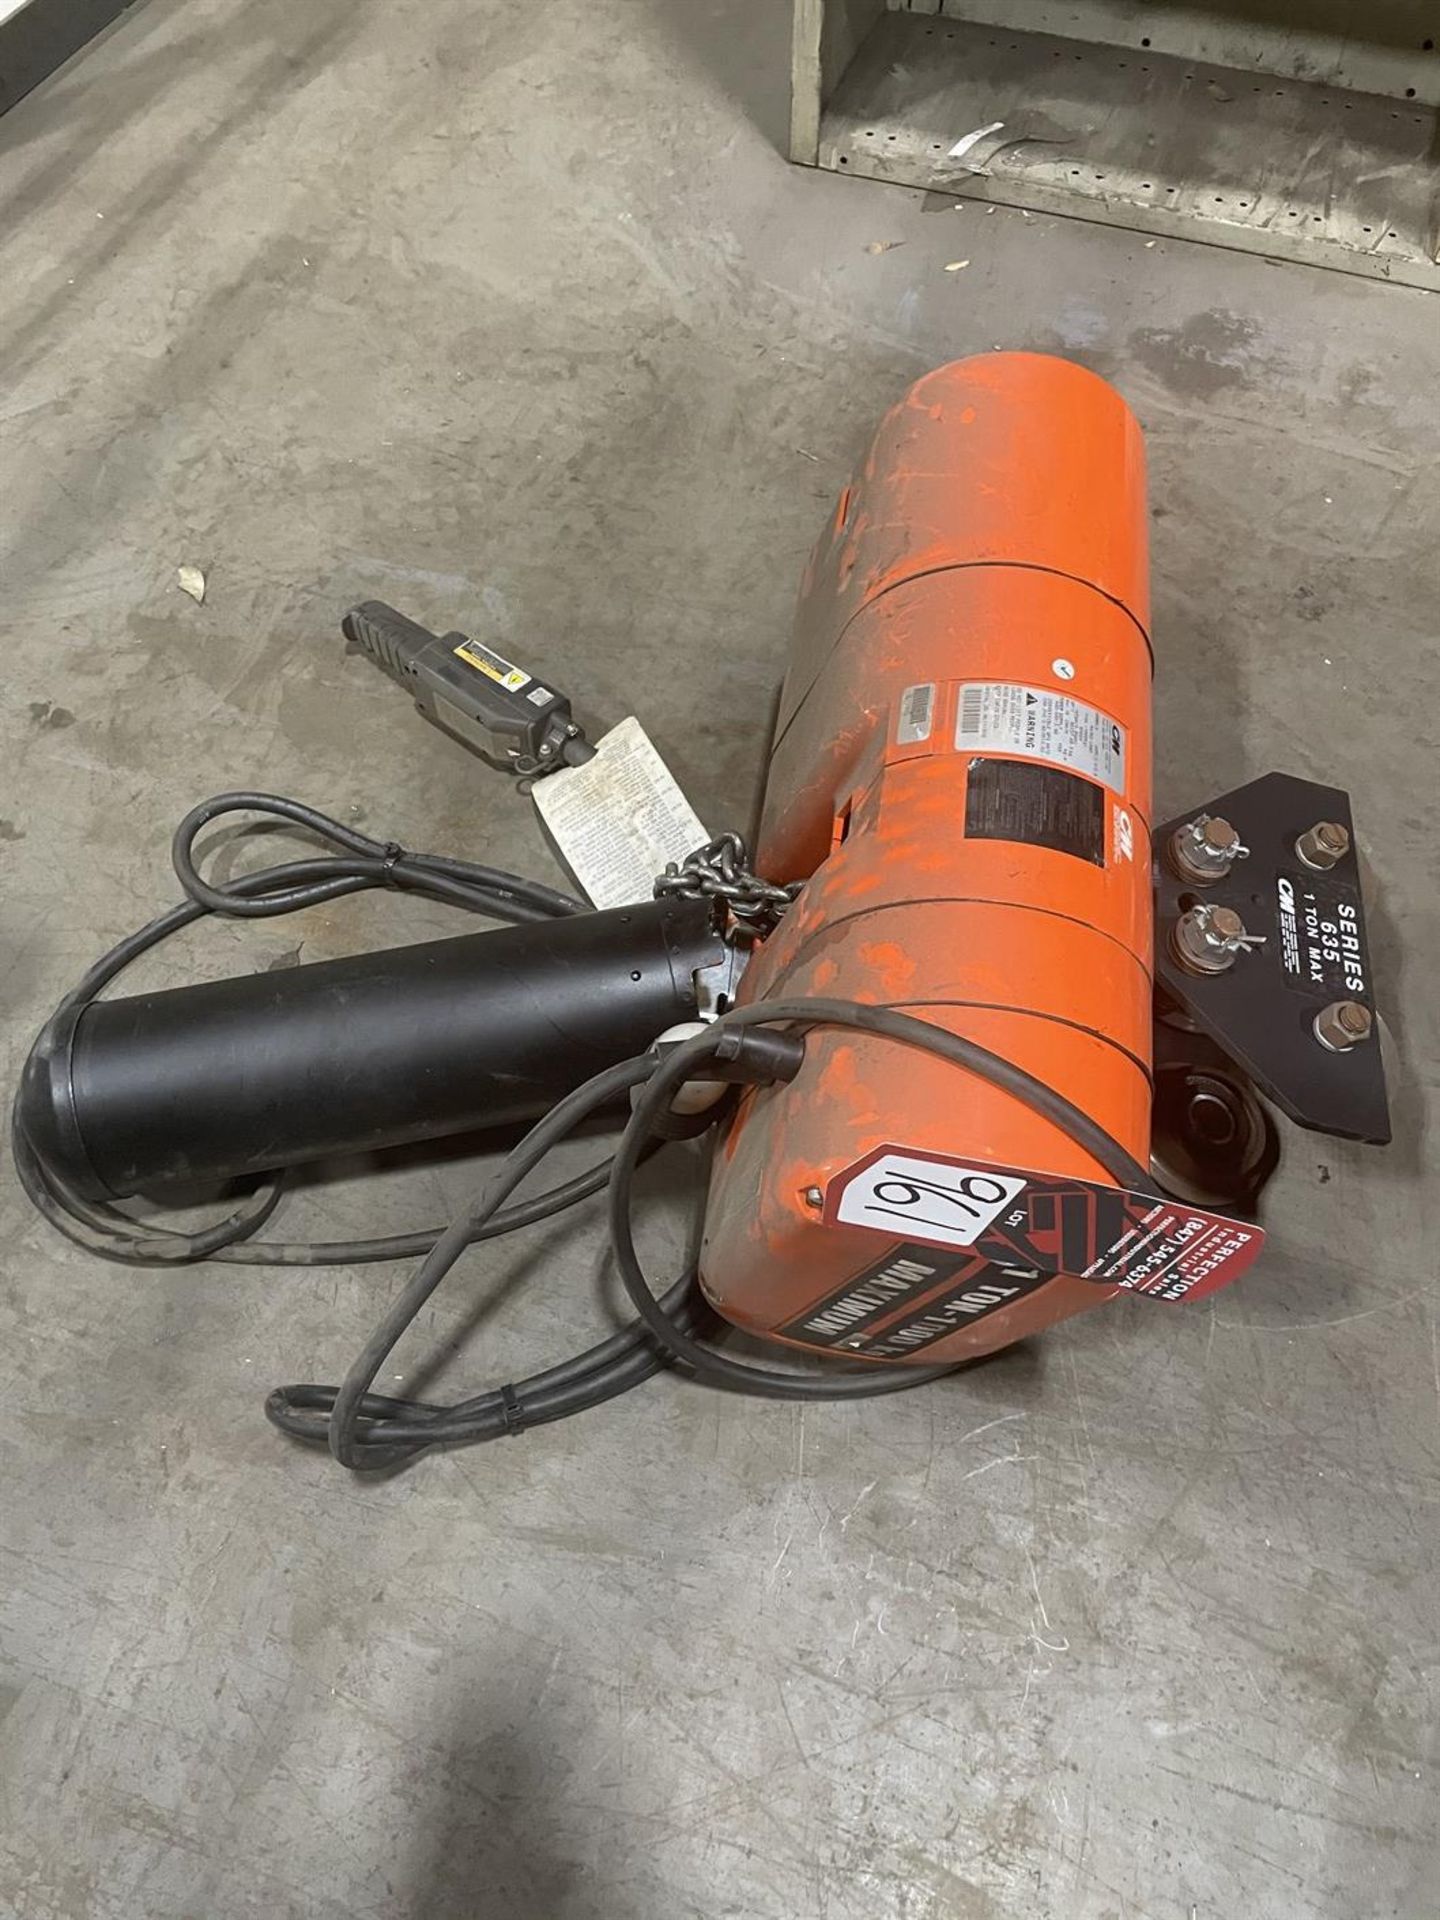 CM Loadstar 1 Ton Electric Hoist w/ Pendant and Trolley - Image 3 of 3